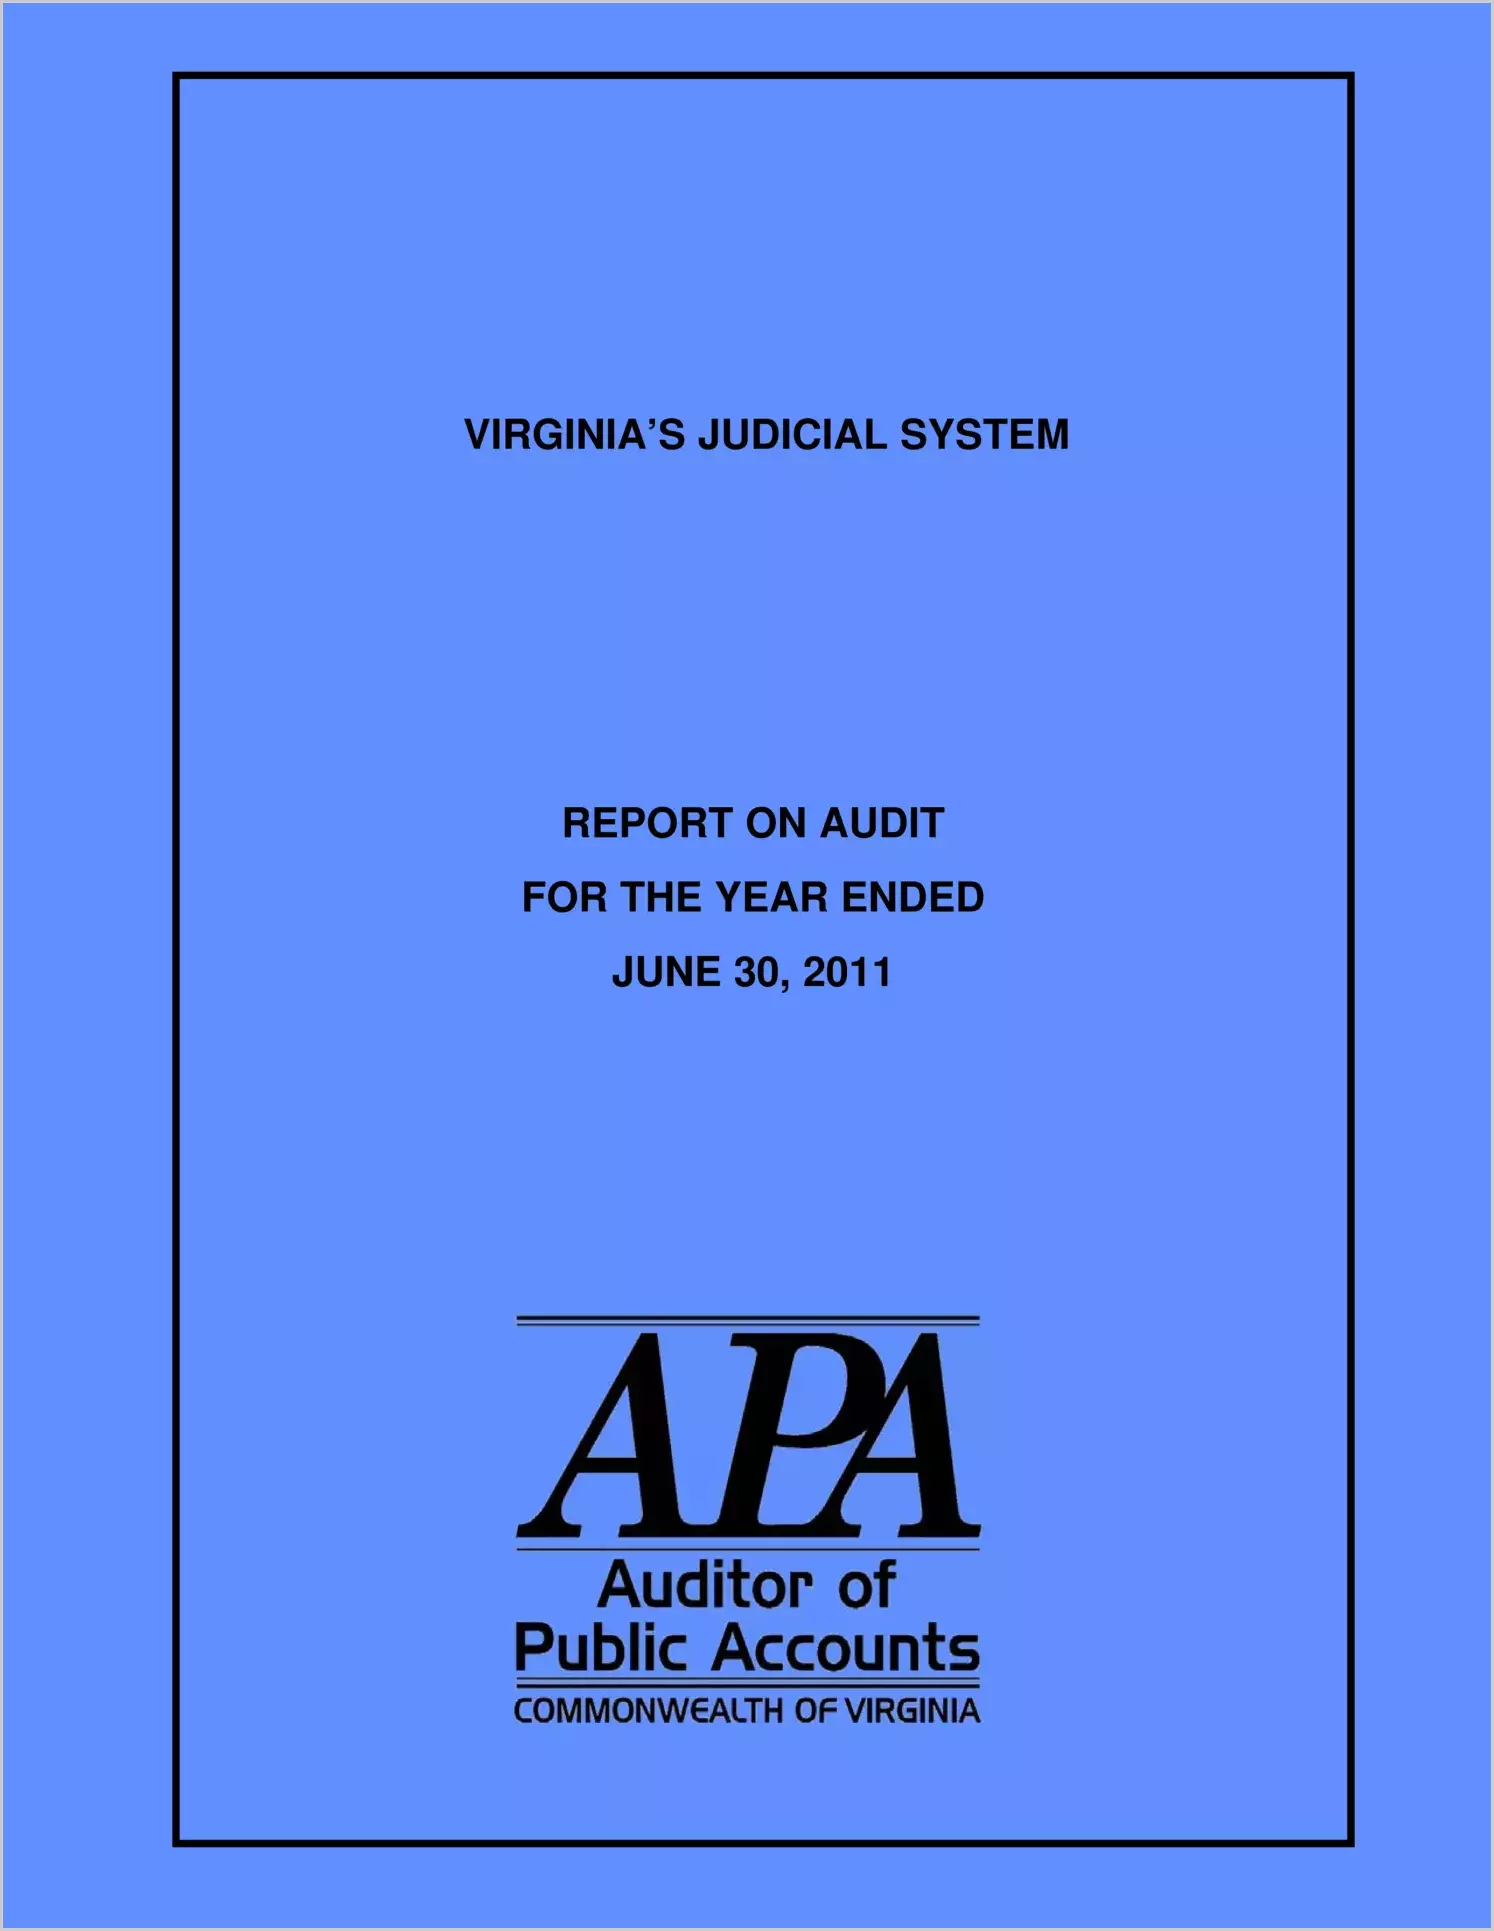 Virginia's Judicial System for the year ended June 30, 2011